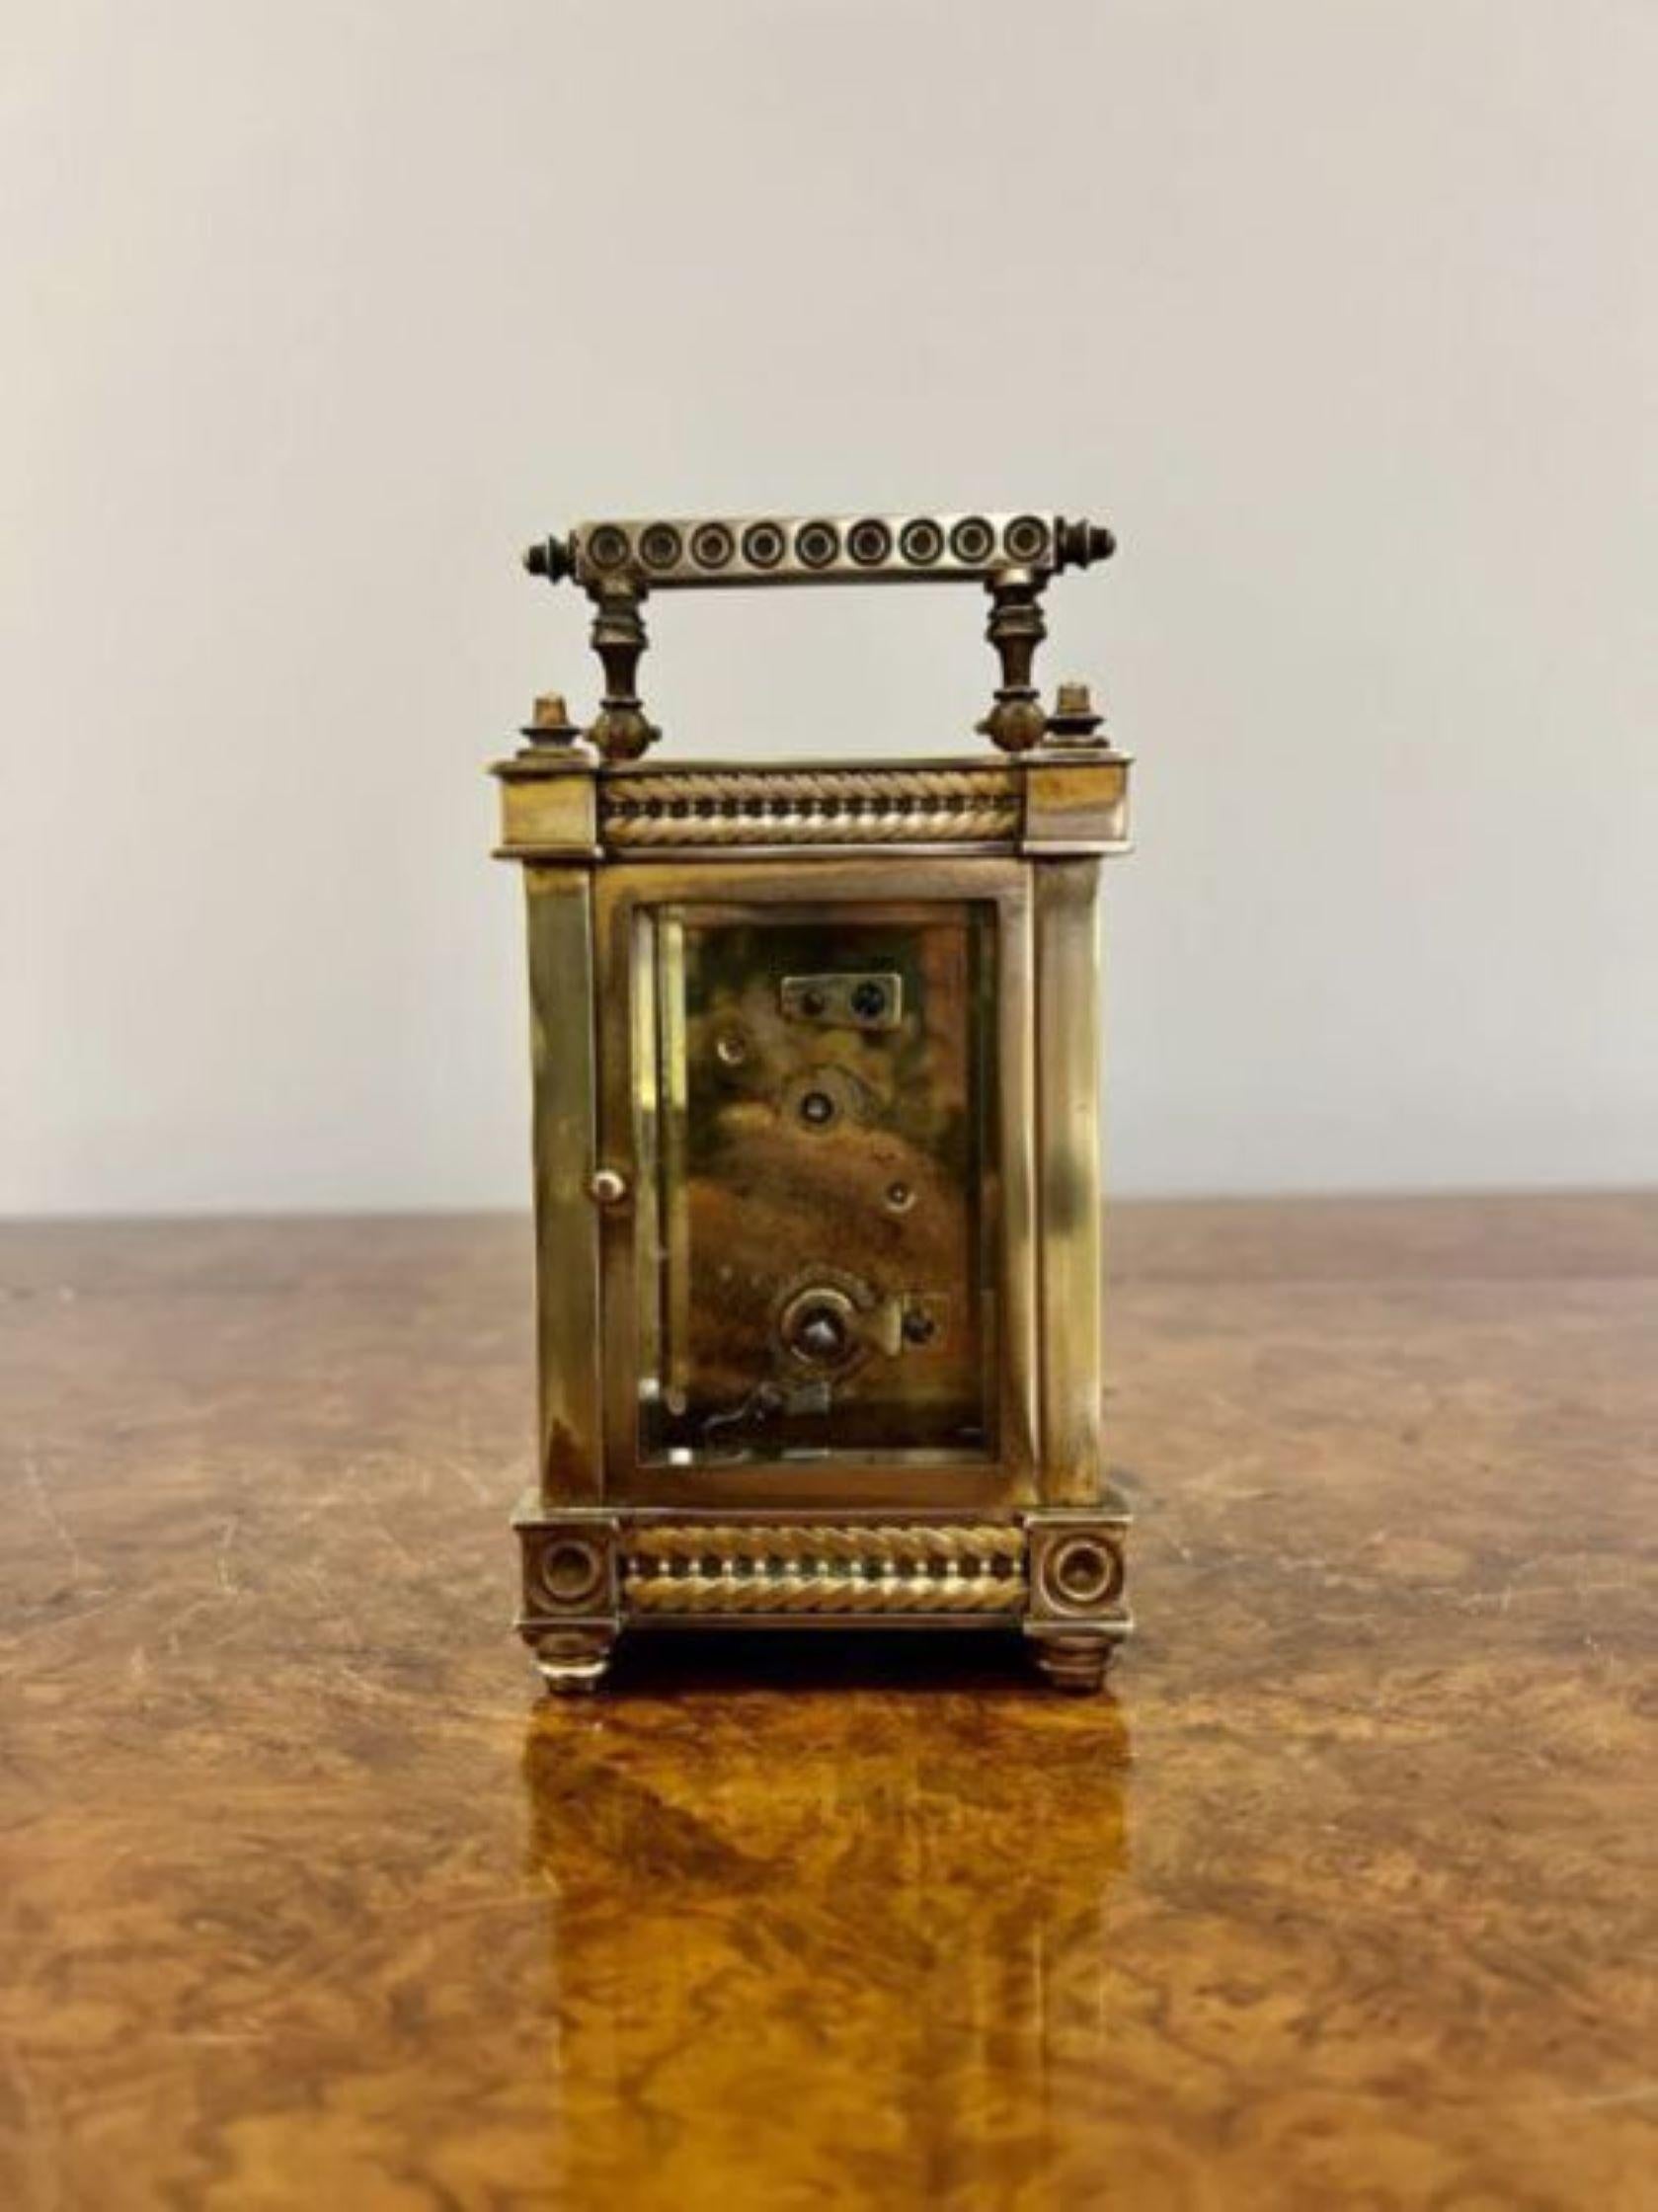 Antique Victorian quality ornate brass French carriage clock having a quality ornate brass and bevelled edge glass carriage clock with a gilded ornate decoration to the front, circular enamel dial with blue numerals and original hands having an 8